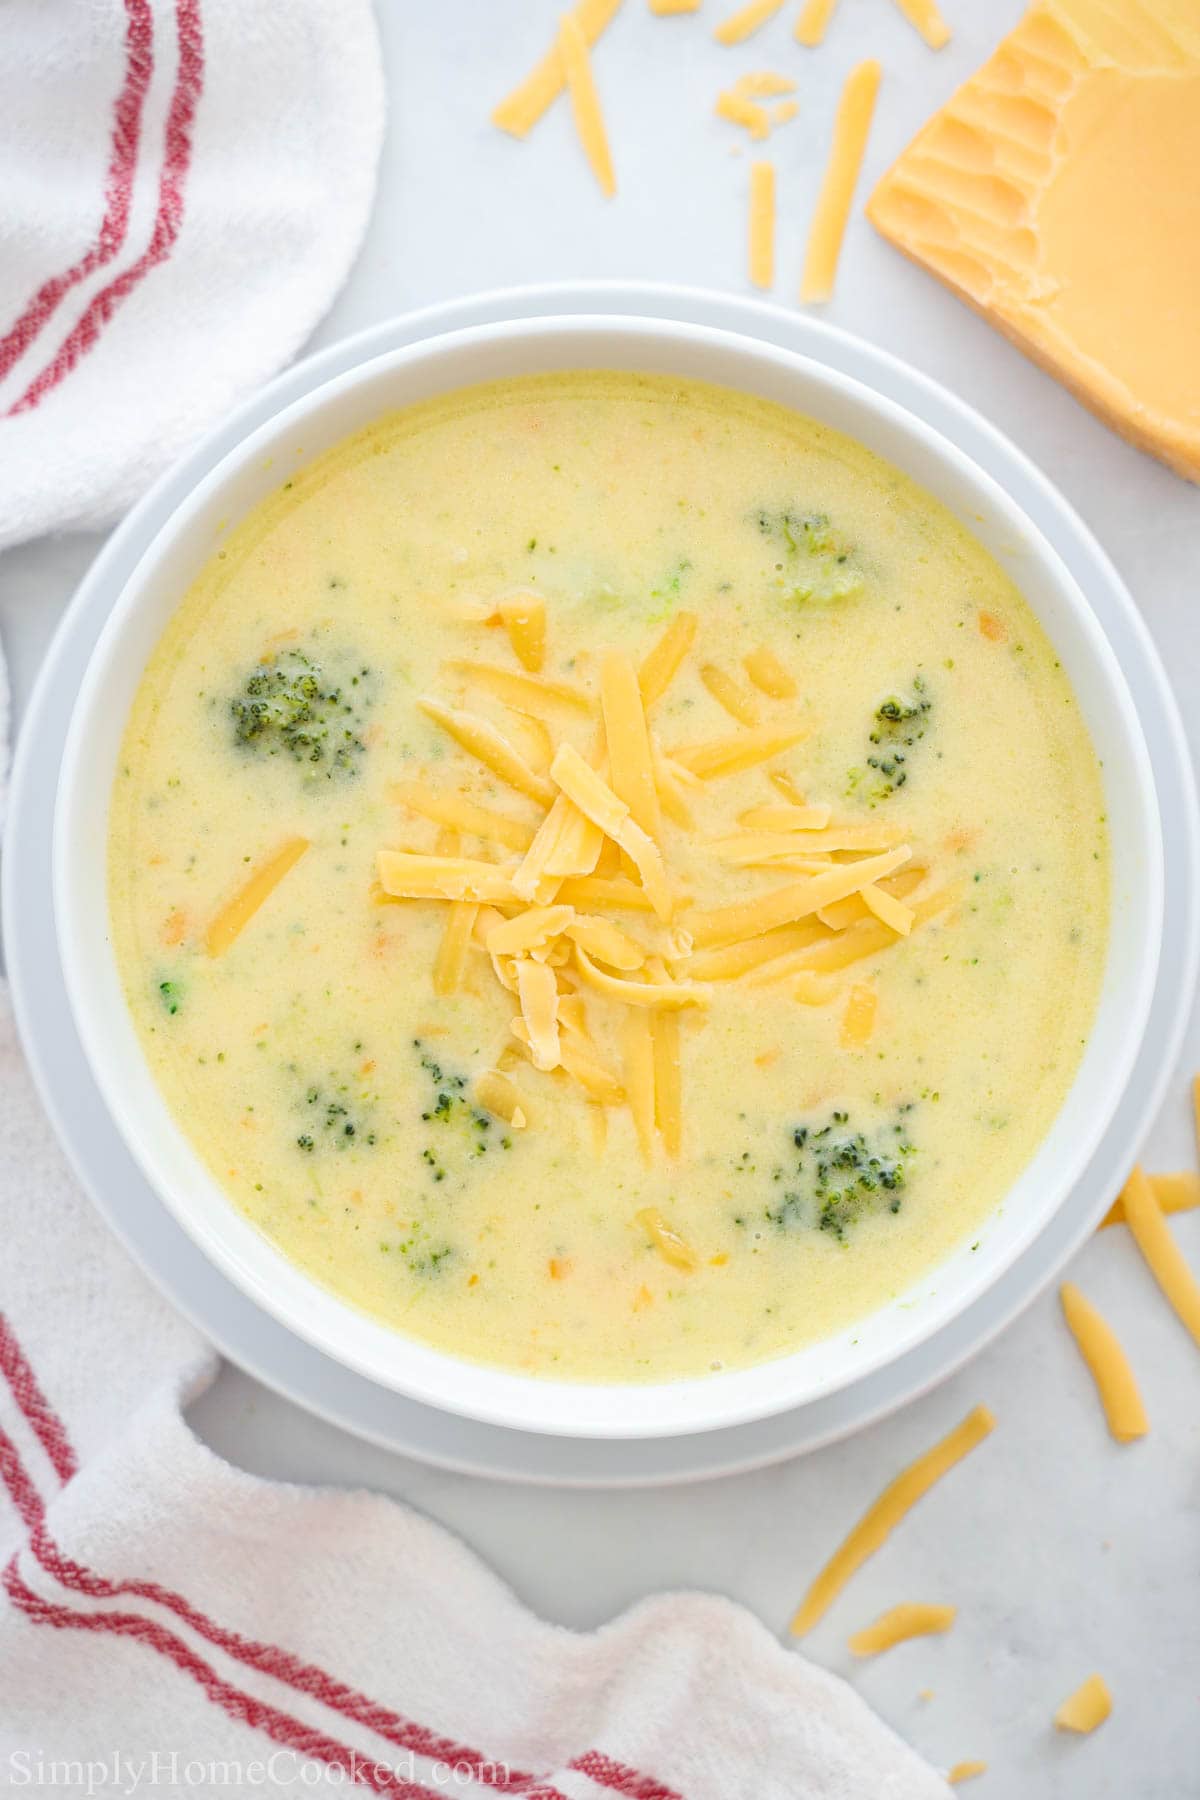 Overhead view of a bowl of Broccoli Cheddar Soup with shredded cheese on top.